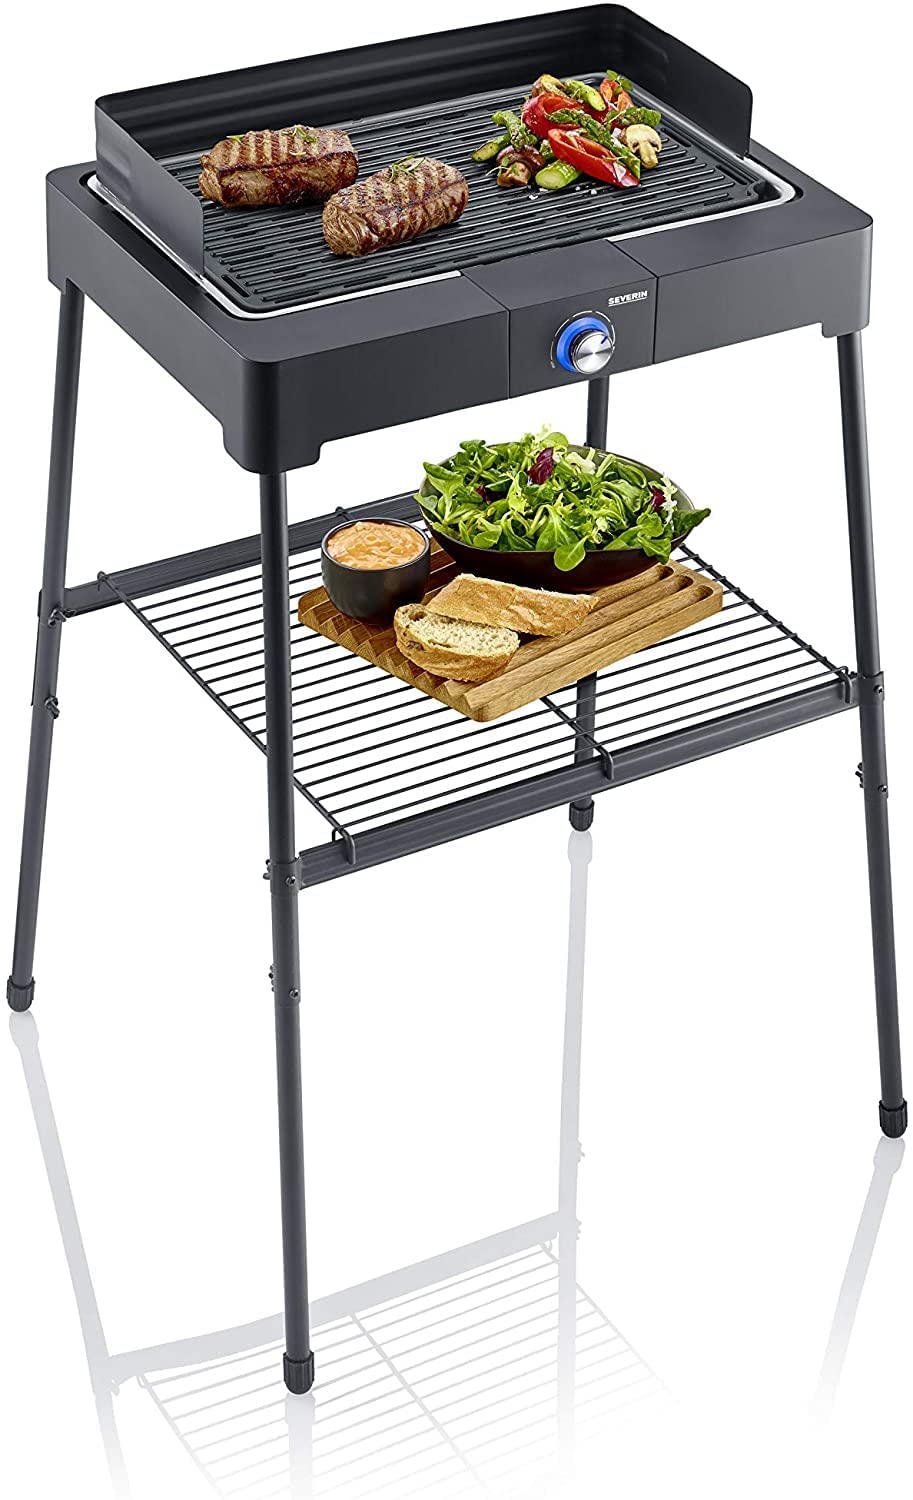 SEVERIN PG 8563 Standing Grill with Aluminium Grill Plate and Stand Frame, Black